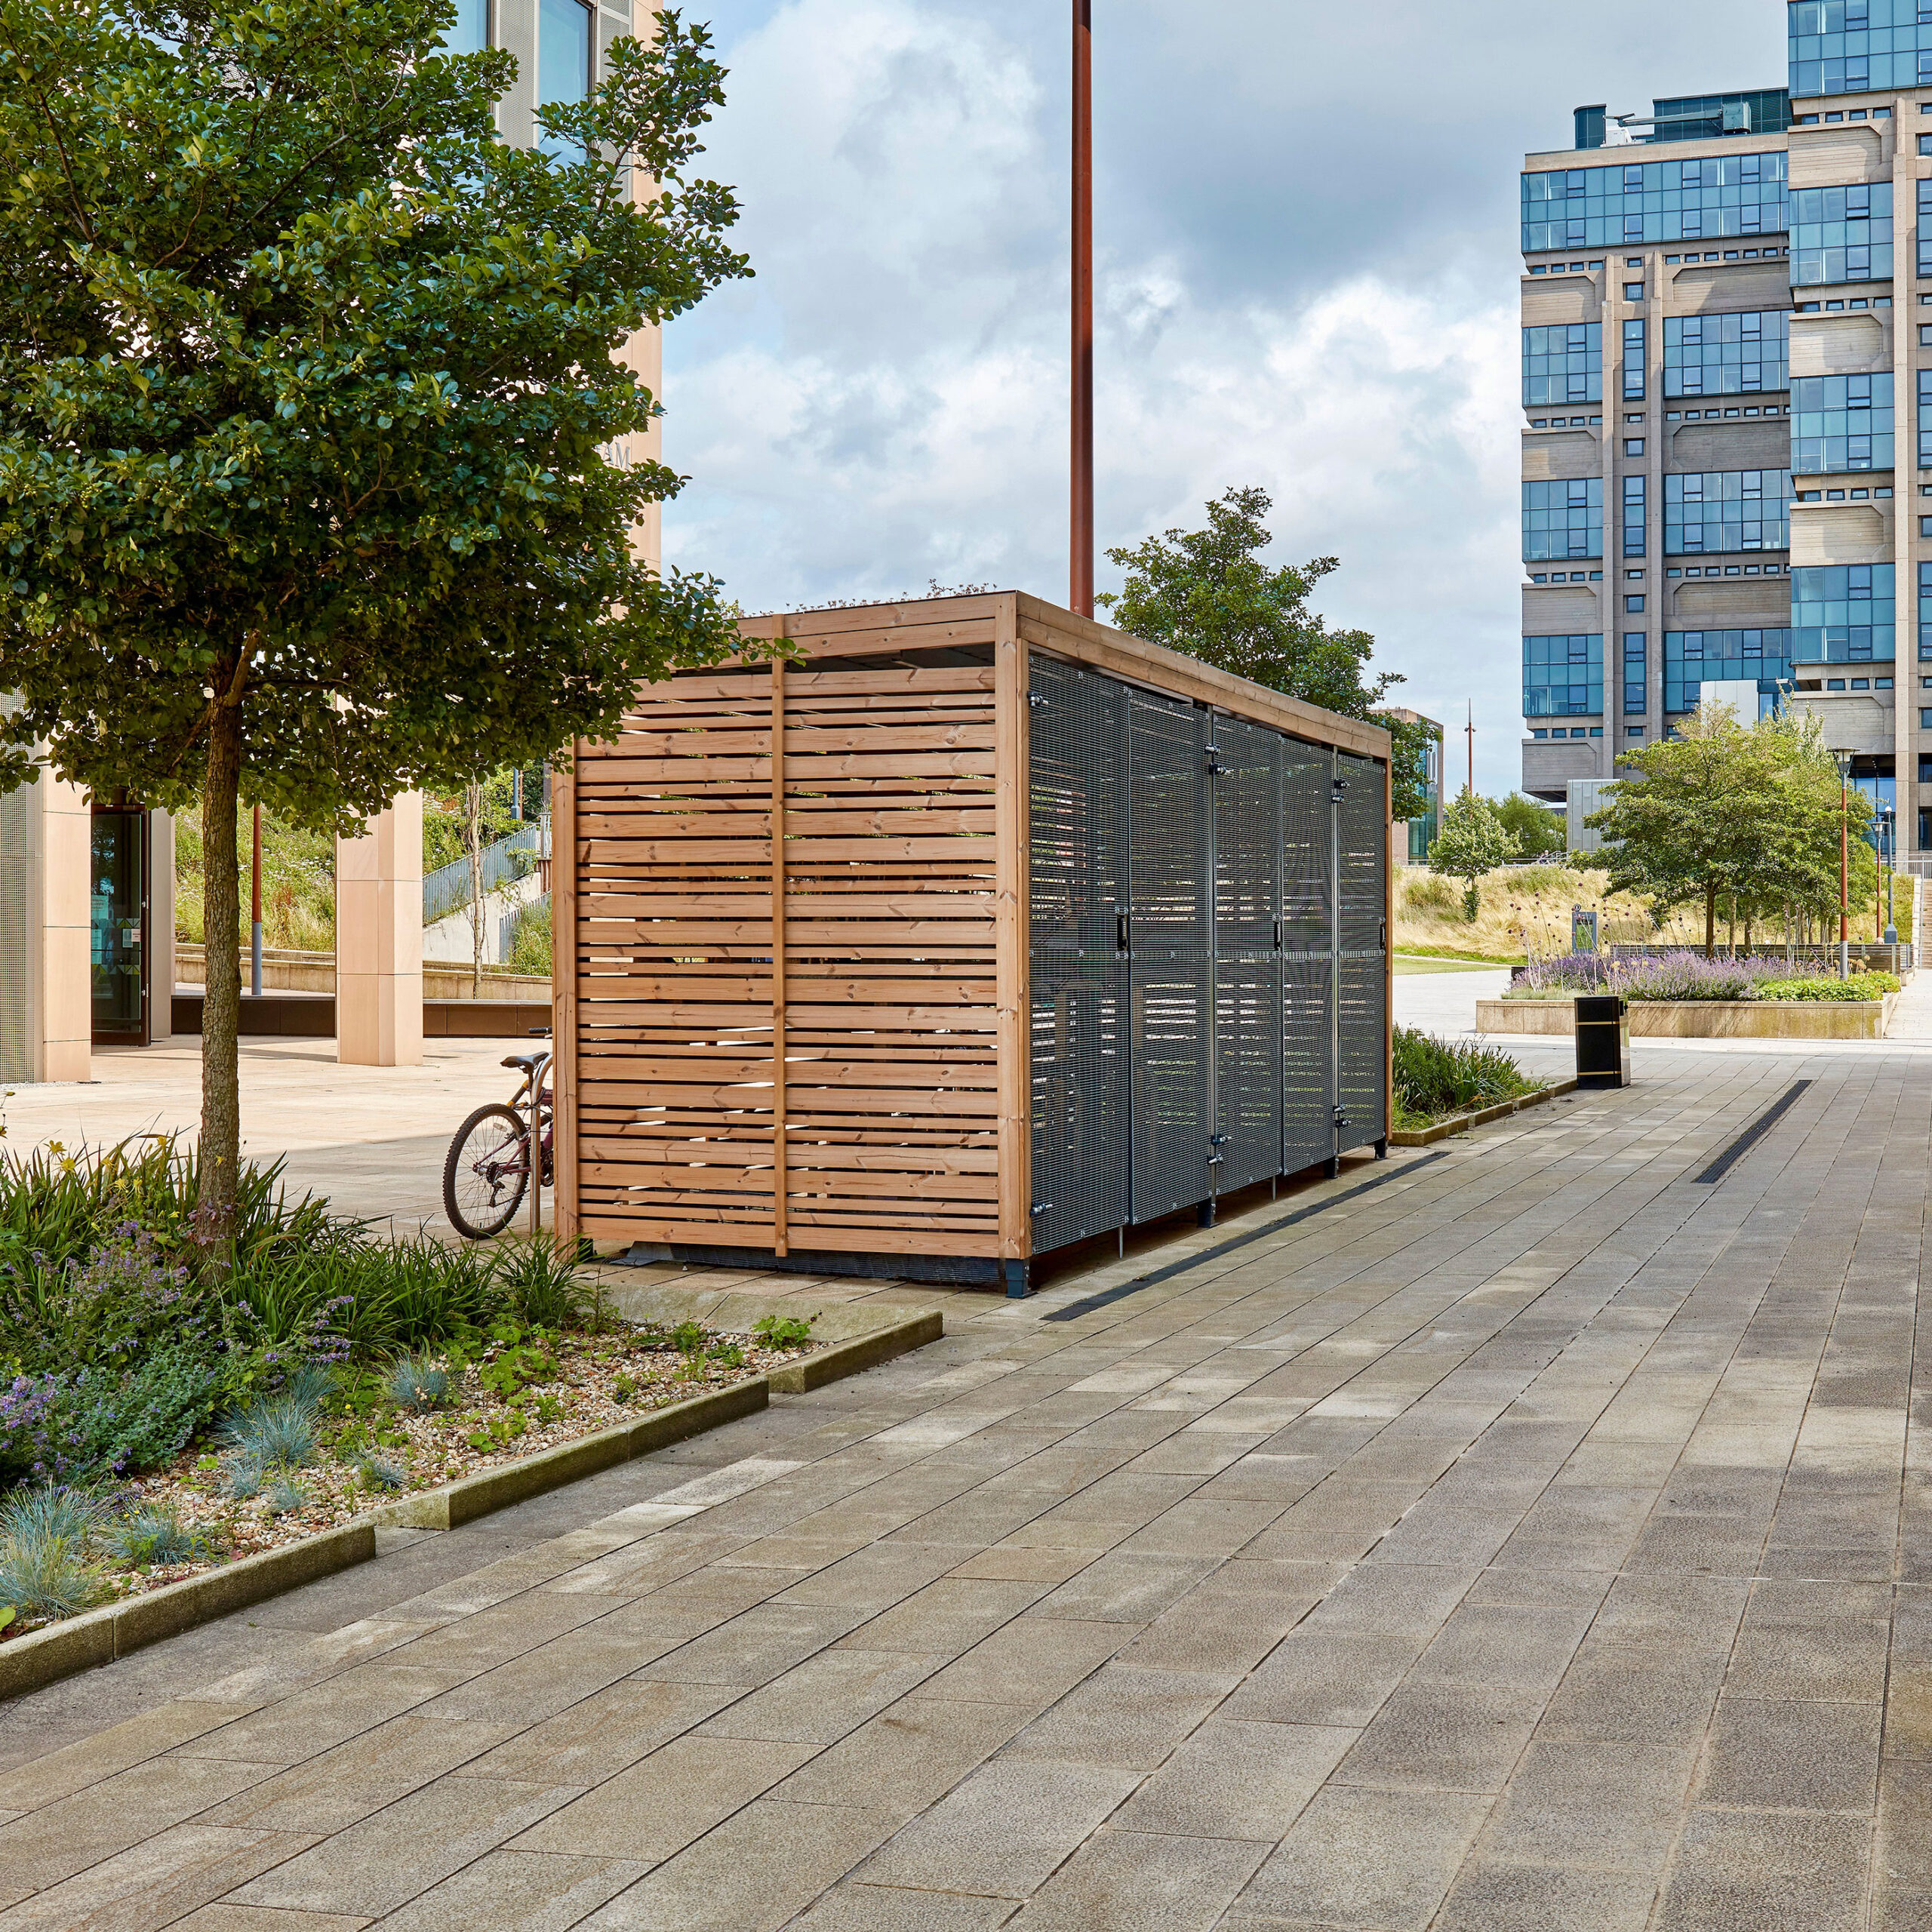 A modern wooden bicycle storage shed with metal elements, located in an urban plaza with paved pathways, landscaping, and tall buildings in the background. a red bicycle is parked next to it.